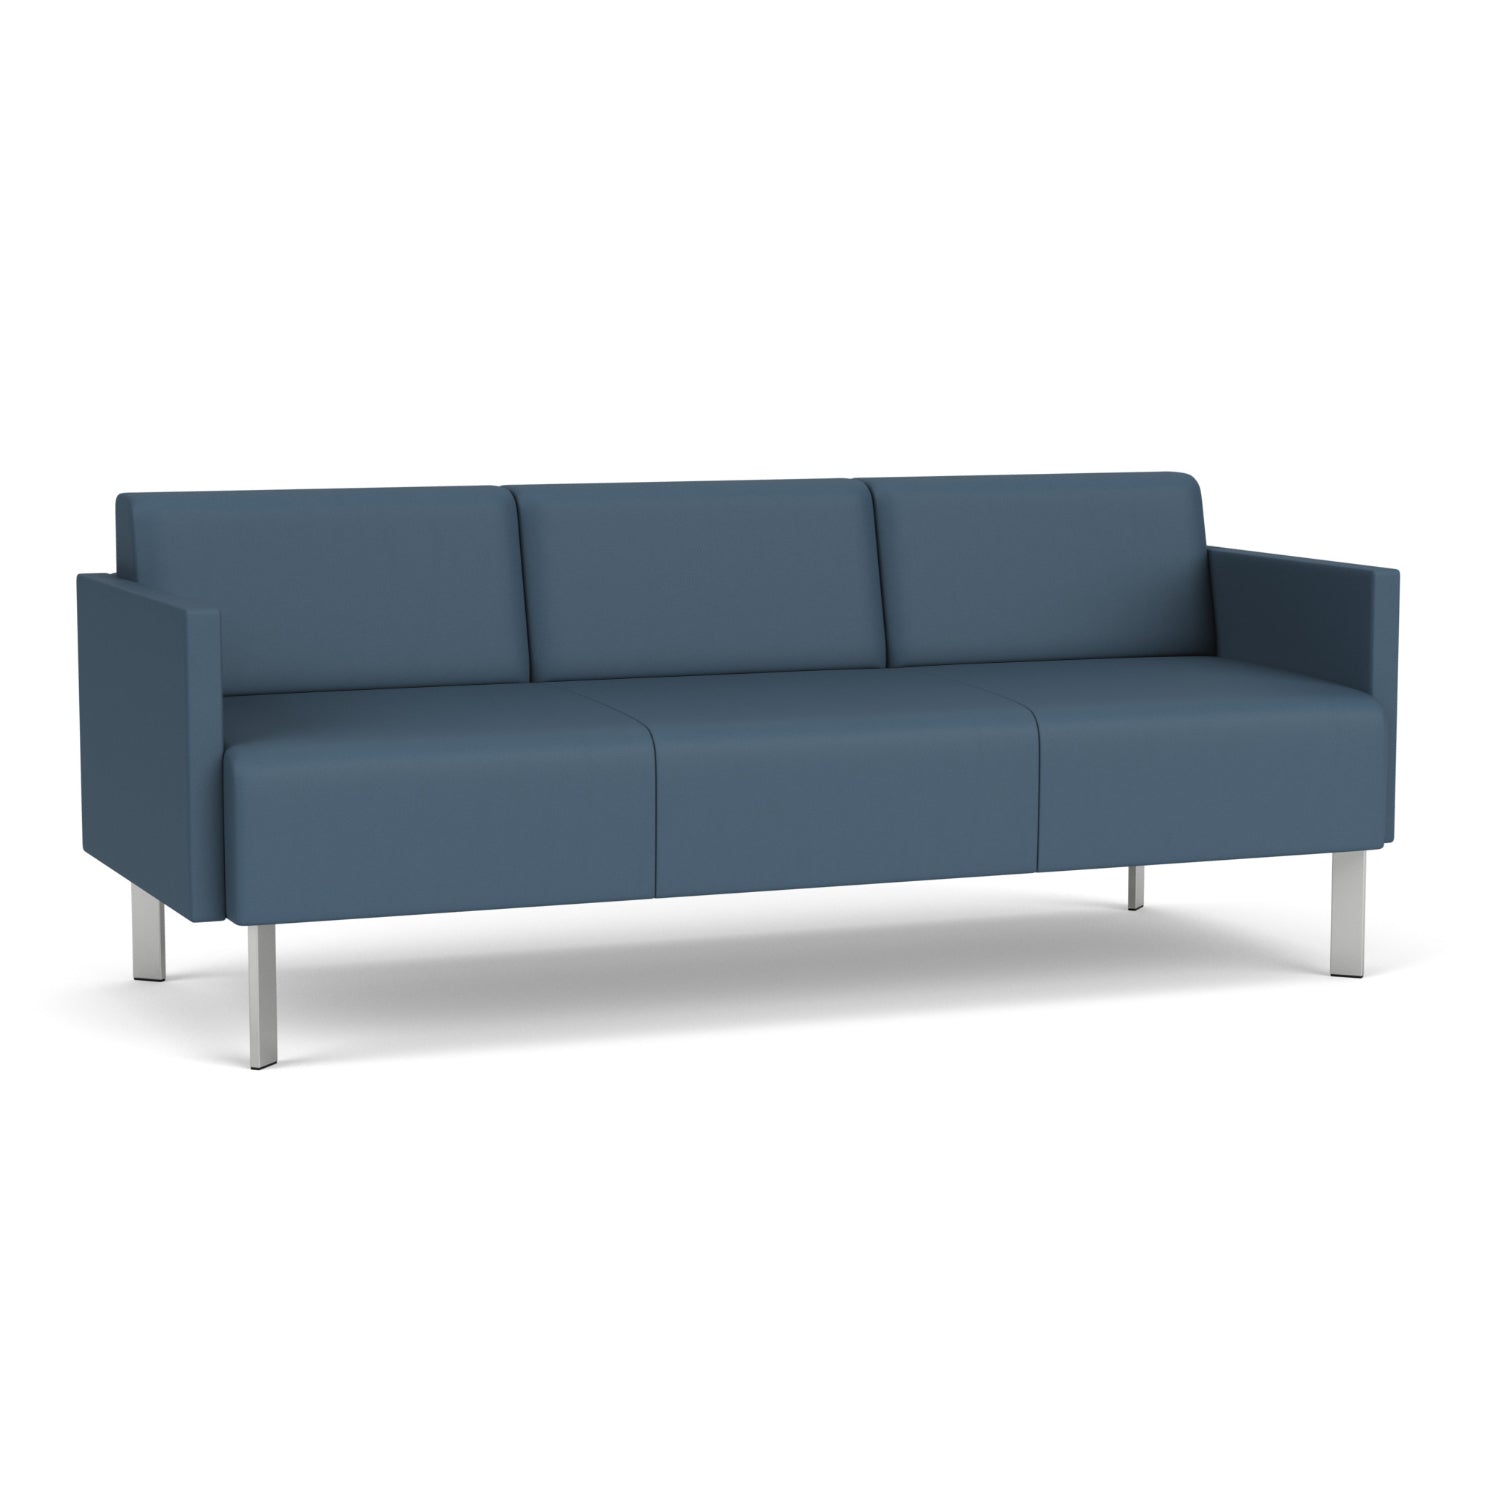 Luxe Collection Reception Seating, Sofa, Standard Vinyl Upholstery, FREE SHIPPING